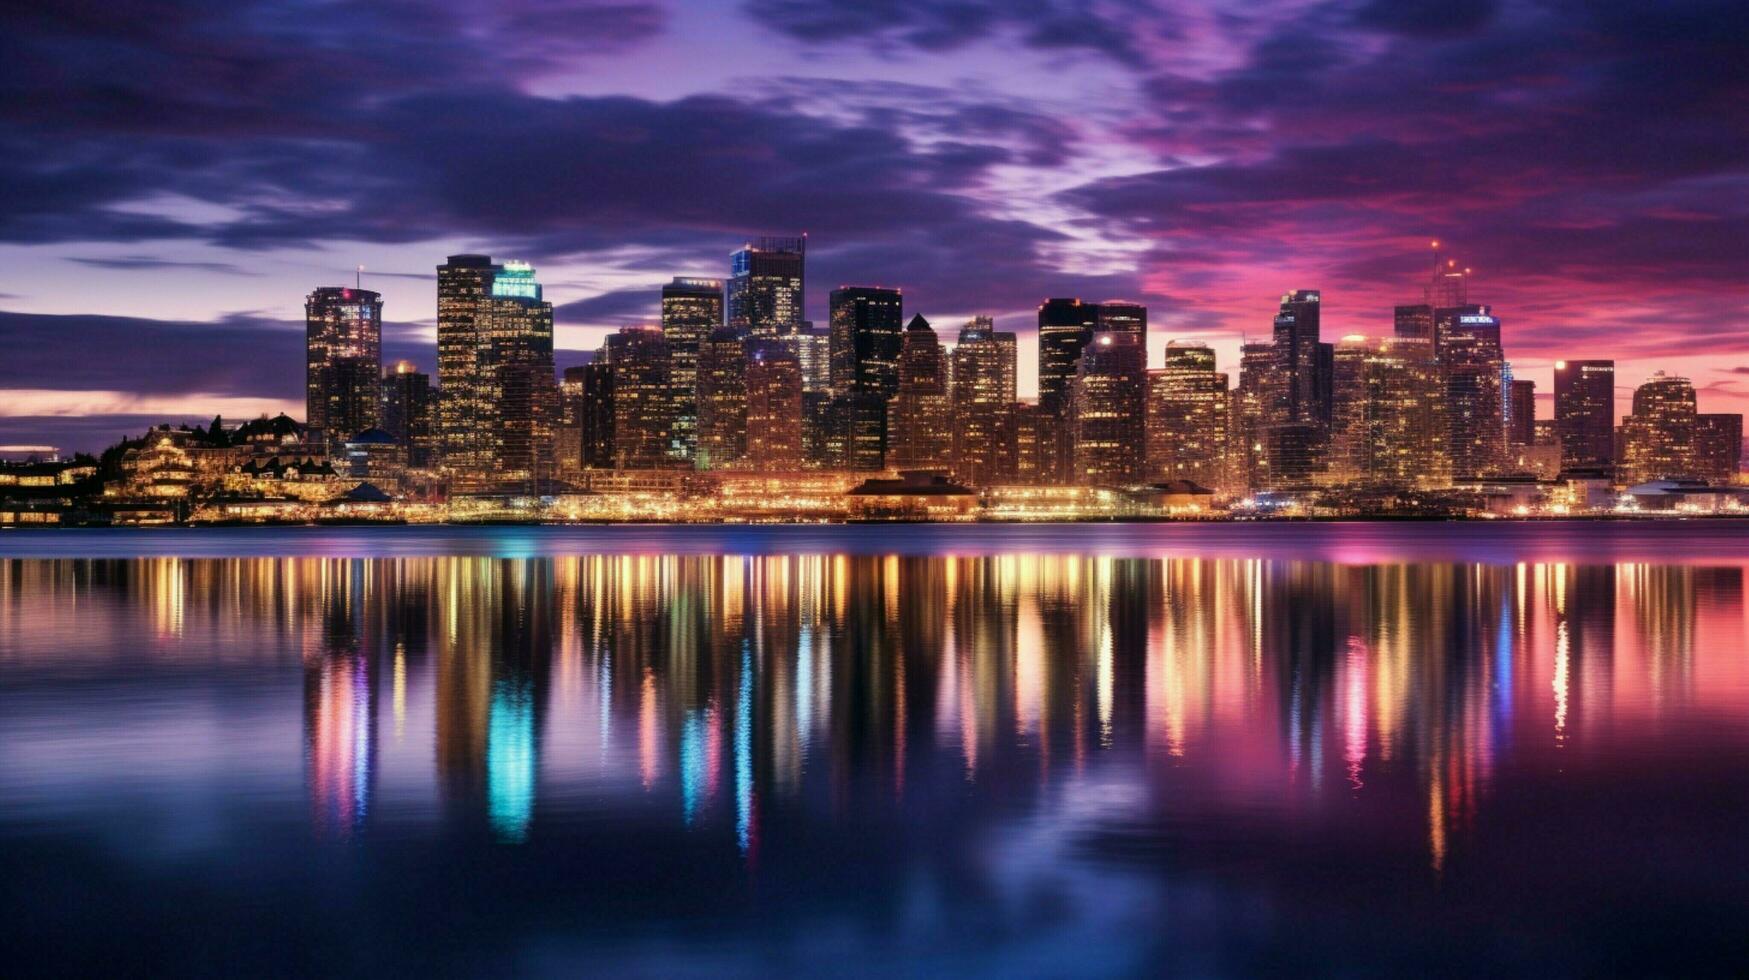 glowing cityscape reflects on waterfront at twilight photo